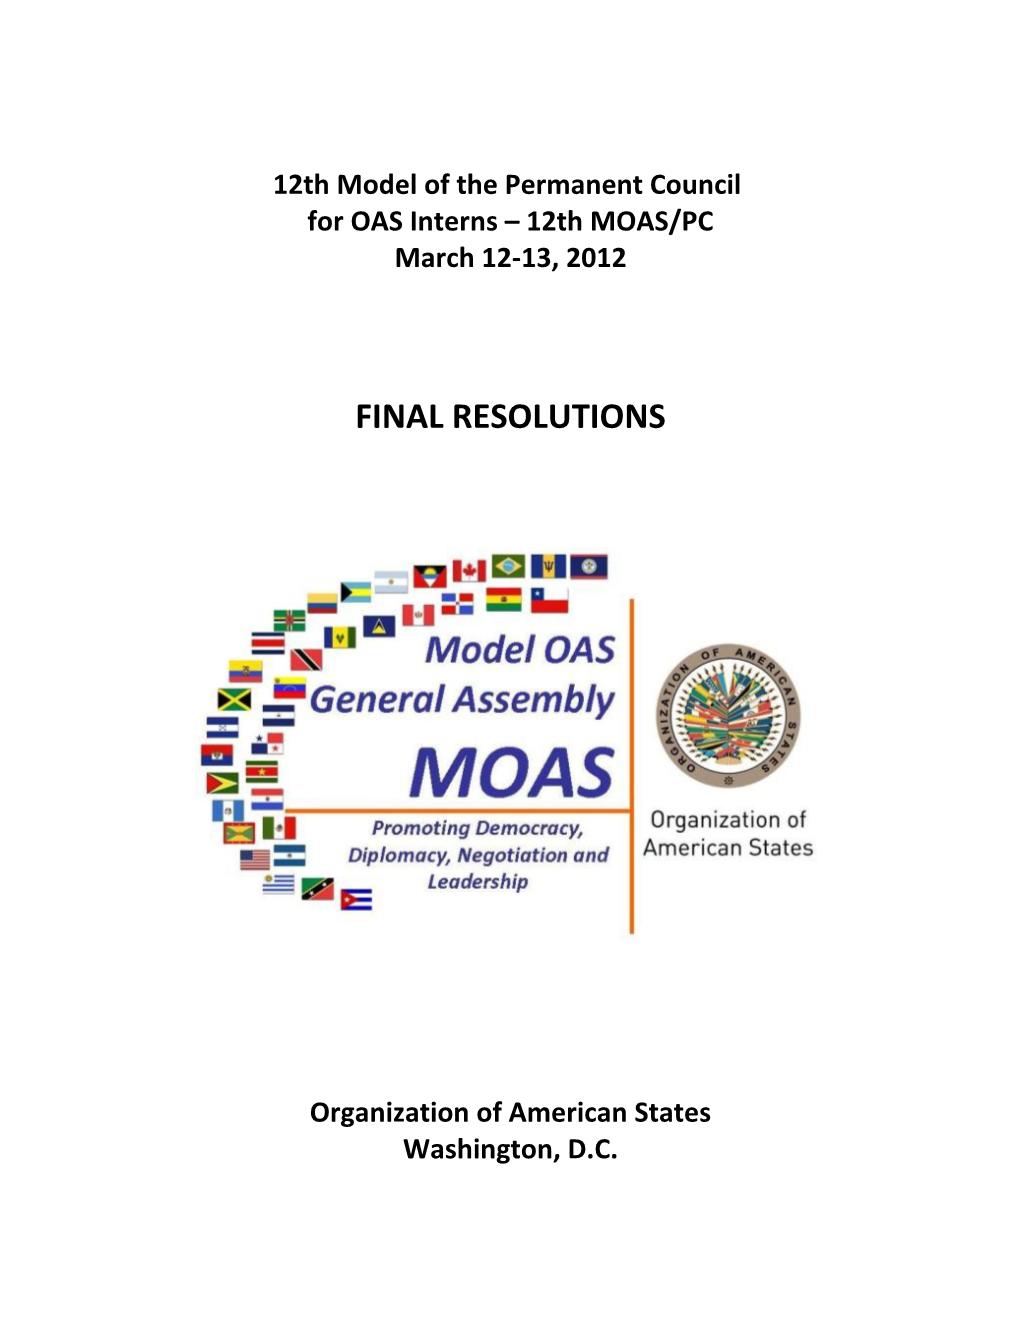 12Th Model of the Permanent Council for OAS Interns (12Th MOAS/PC)